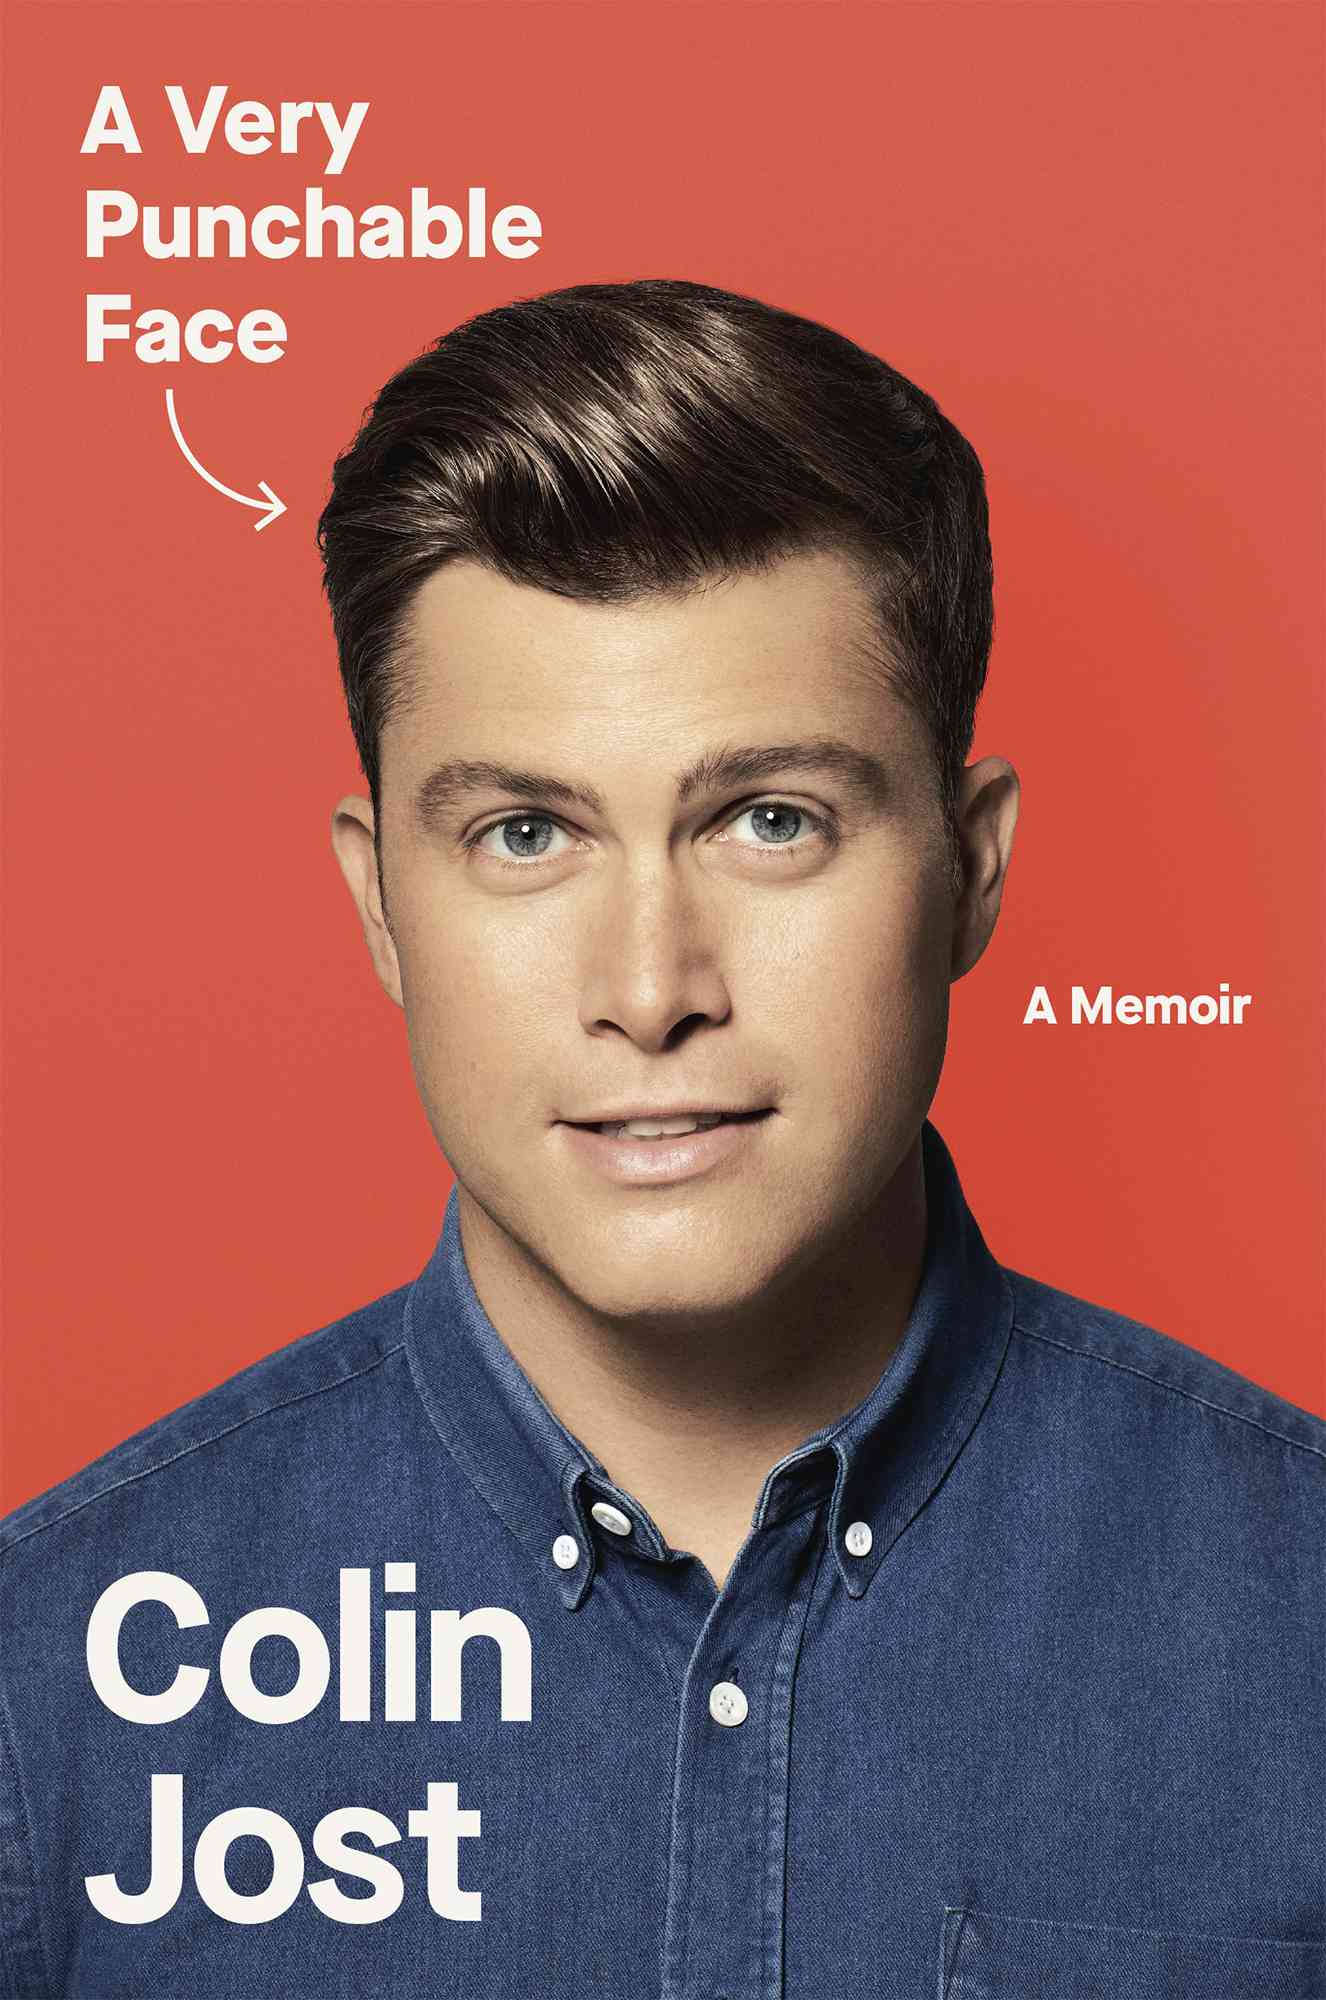 A Very Punchable Face by Colin Jost